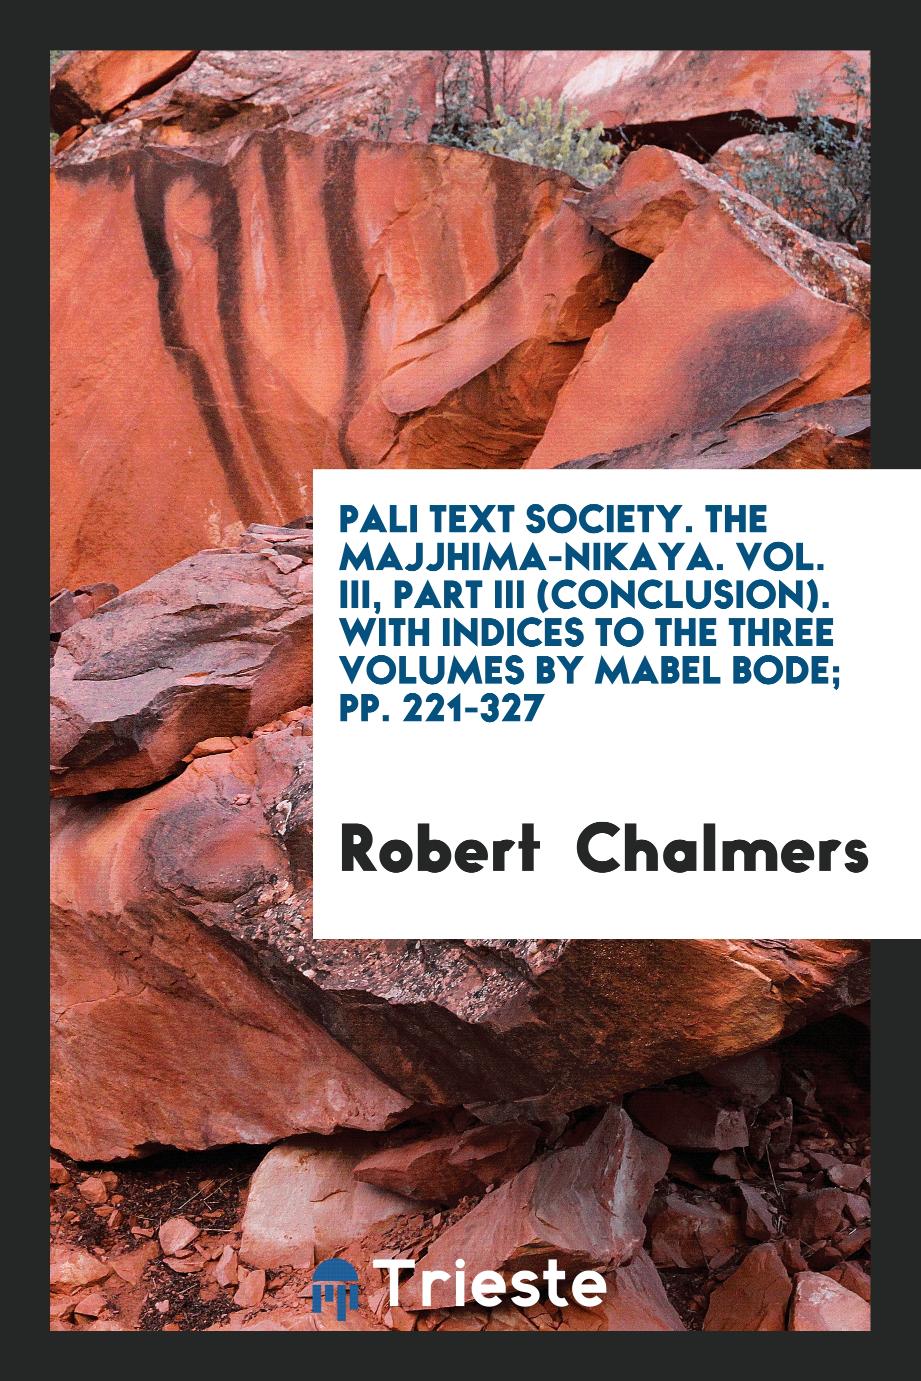 Pali Text Society. The Majjhima-Nikaya. Vol. III, Part III (Conclusion). With Indices to the Three Volumes by Mabel Bode; pp. 221-327